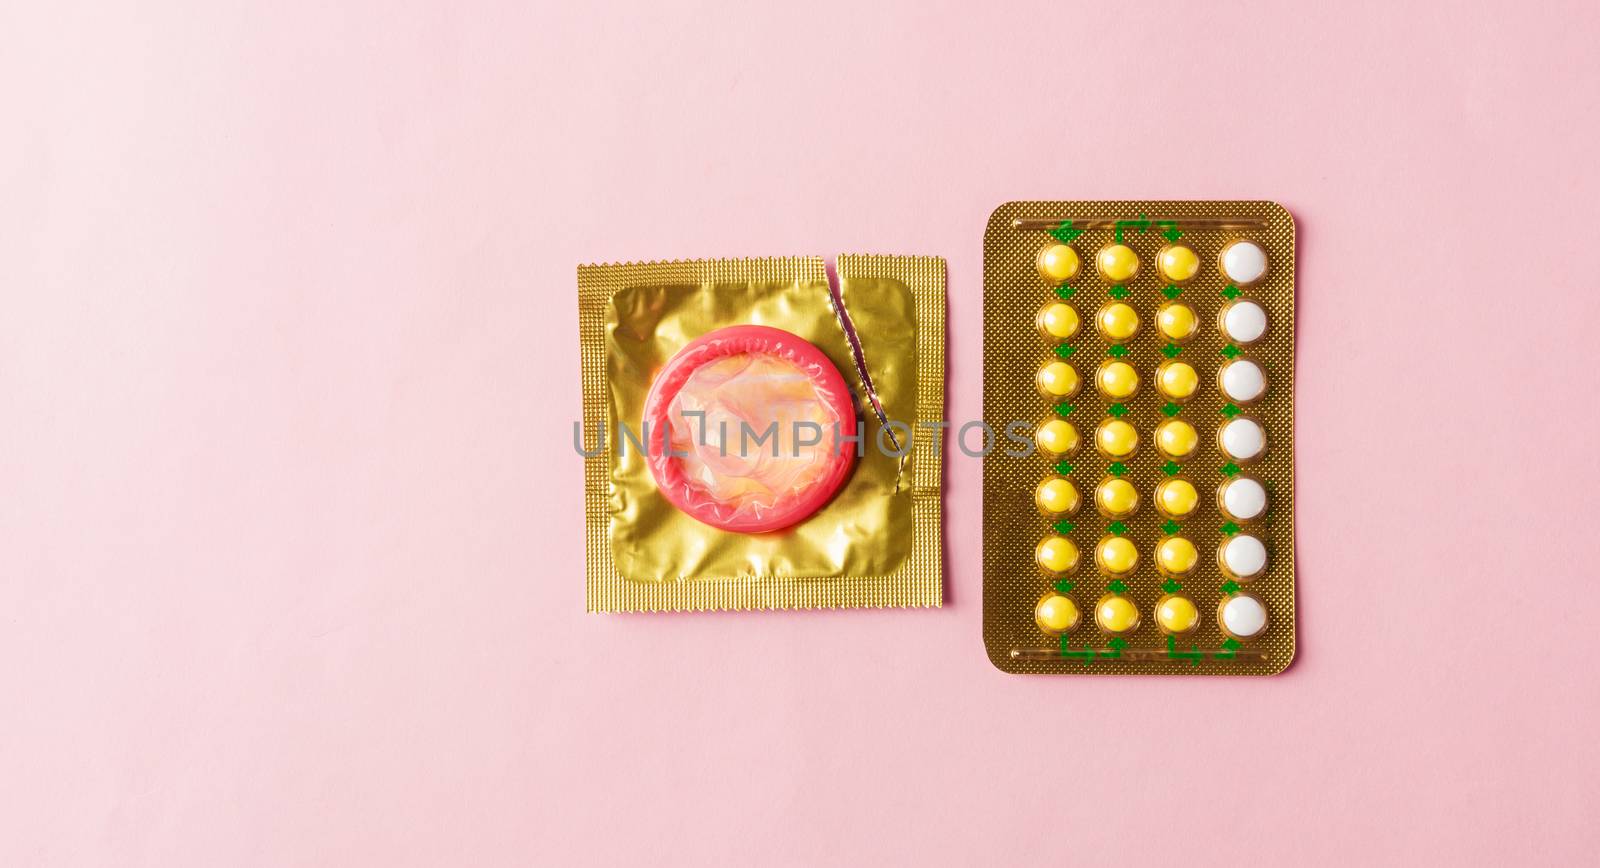 condom on wrapper pack and contraceptive pills blister by Sorapop